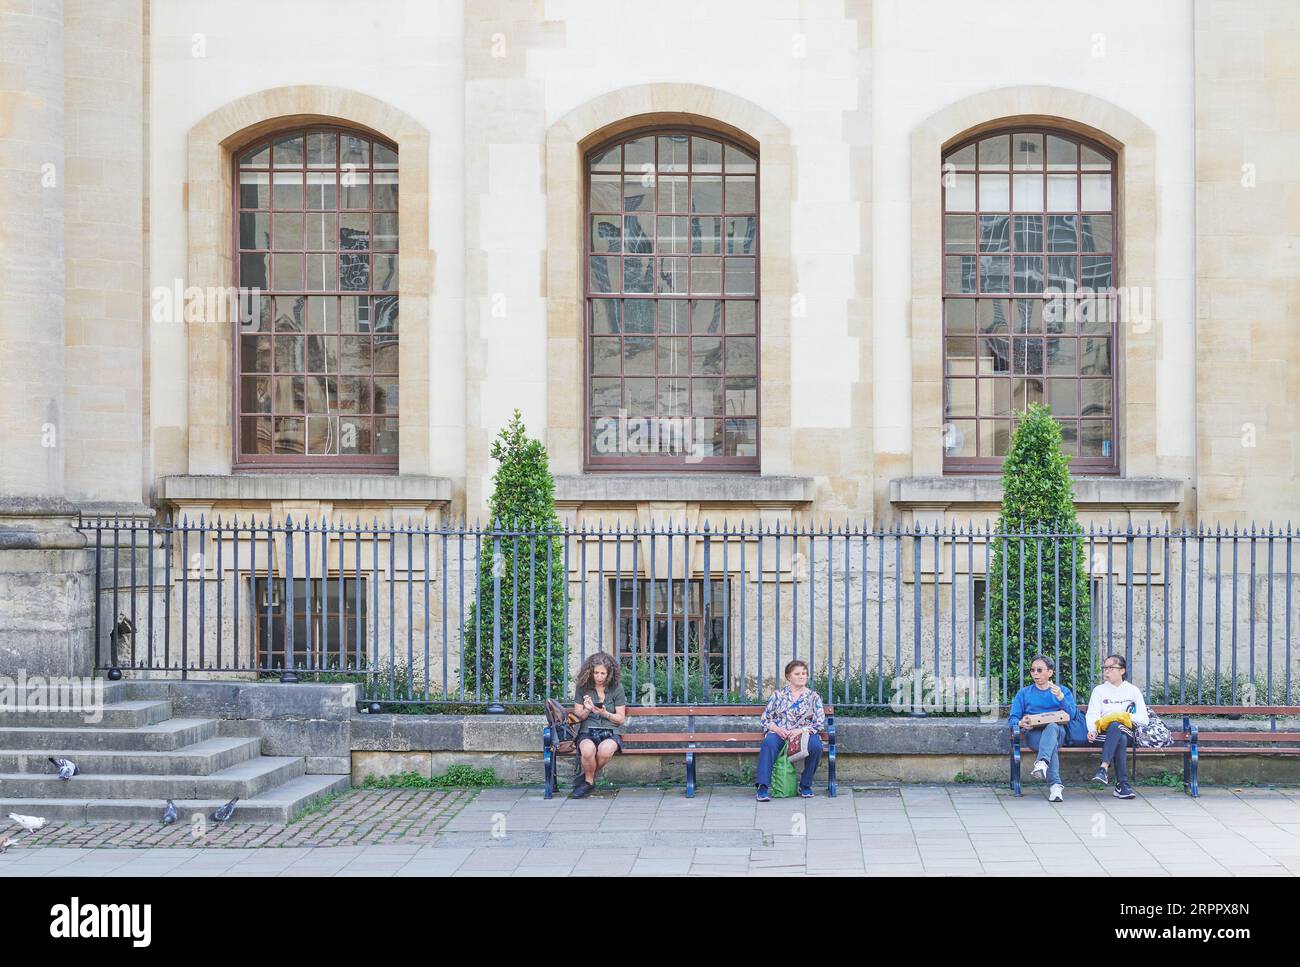 Tourists take a break on a bench outside the Weston Library, Bodleian Library, University of Oxford, England. Stock Photo